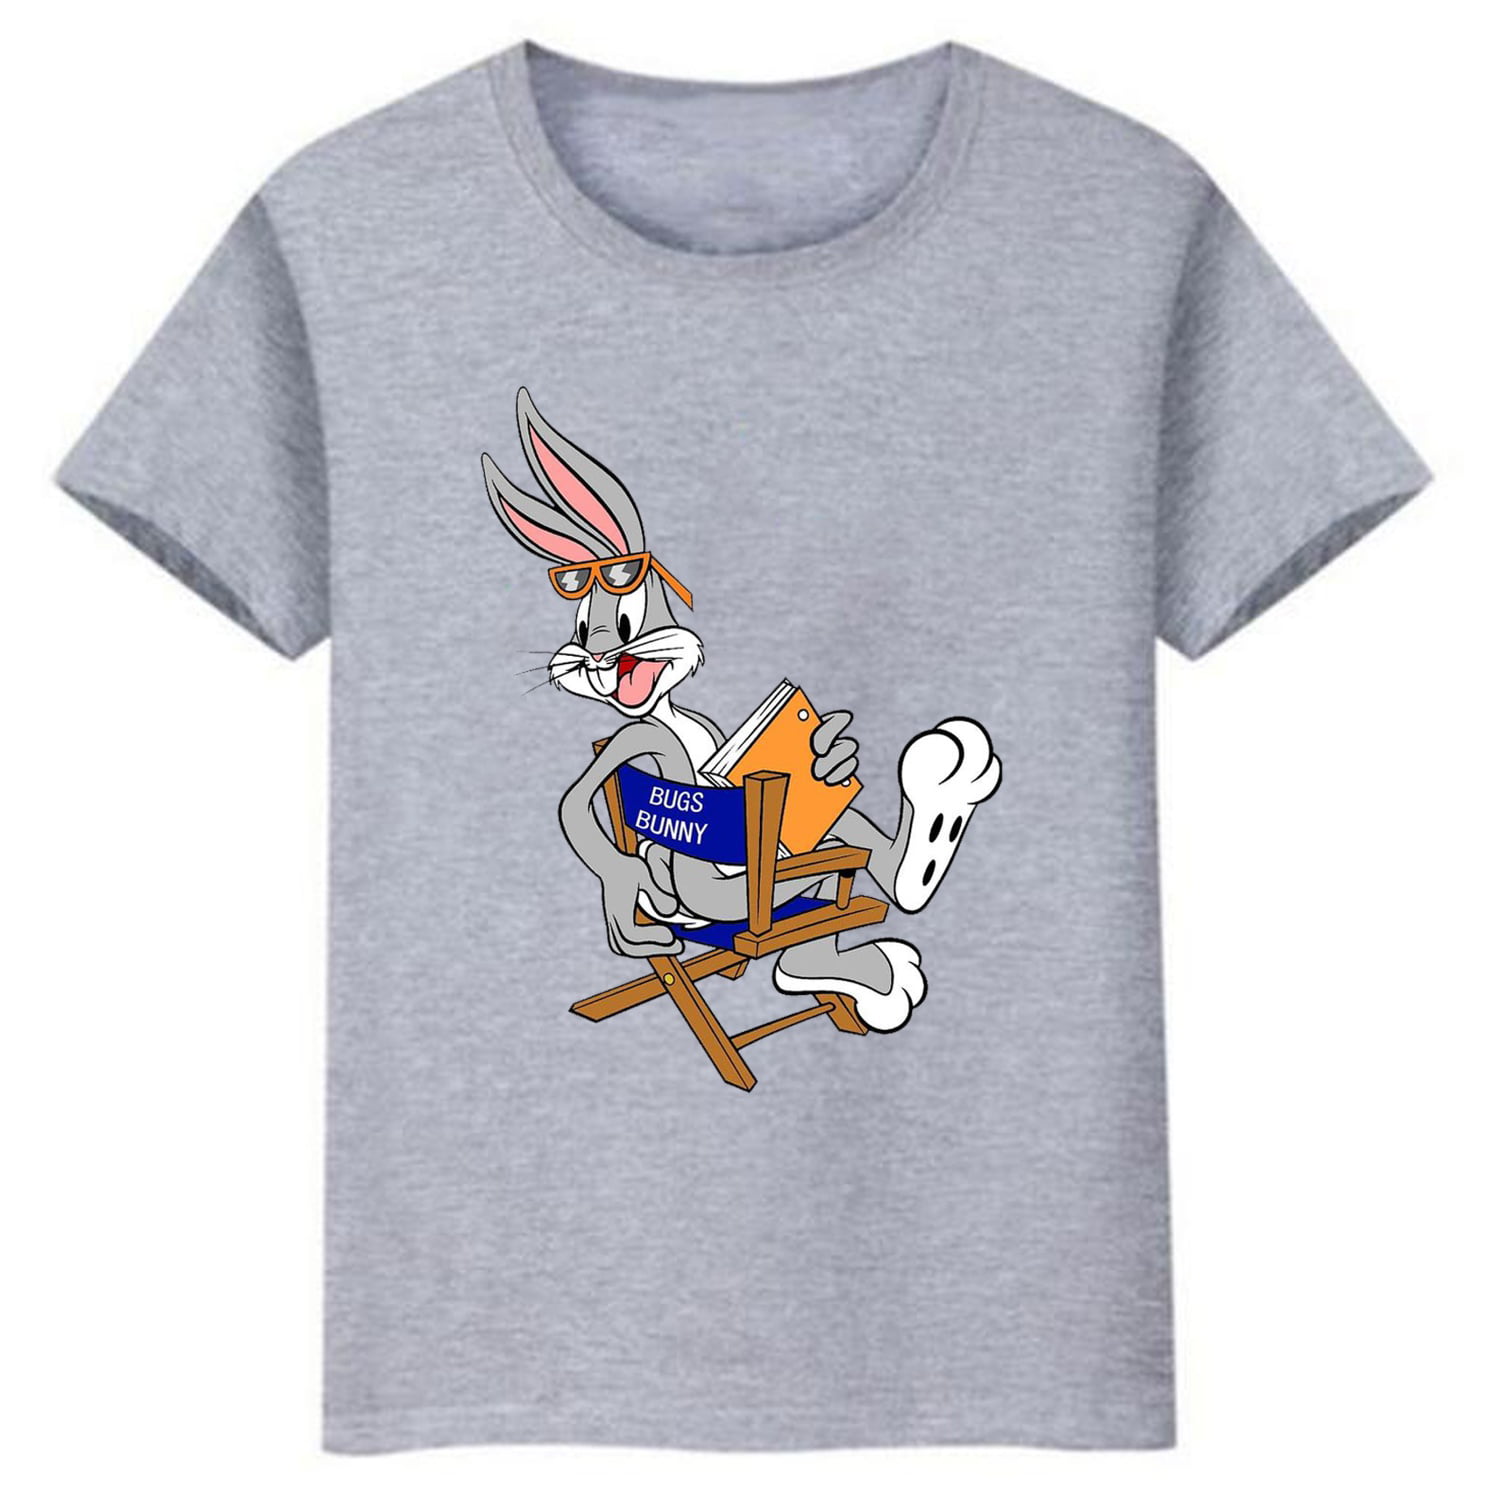 for Bunny Rabbit Funny Cartton Graphic O-Neck Unisex Bugs Streewear Looney Sleeves, Printed Children White T-Shirts Tunes Short Tops